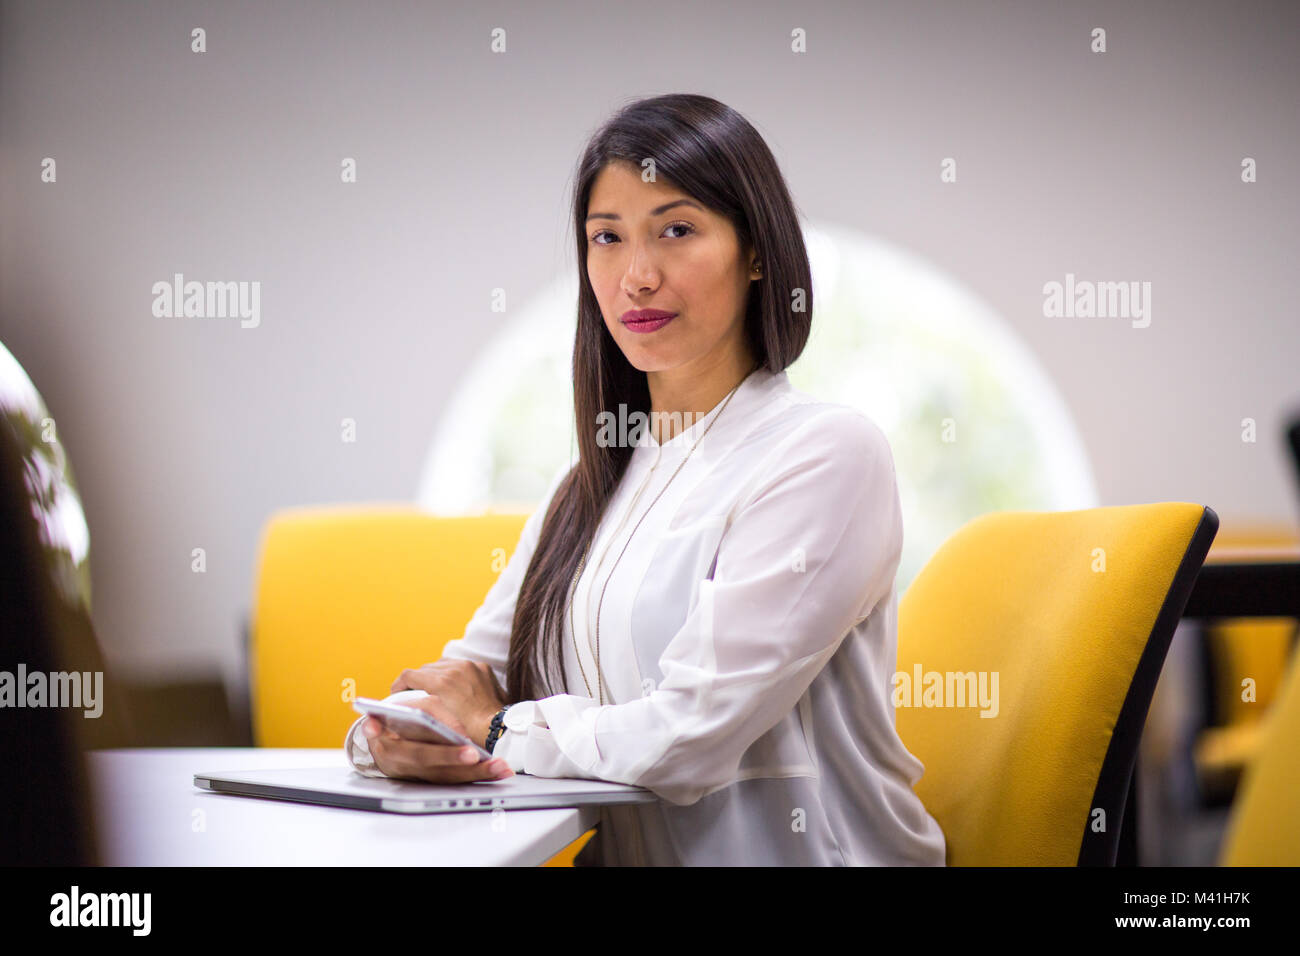 Businesswoman confidently looking at camera Stock Photo